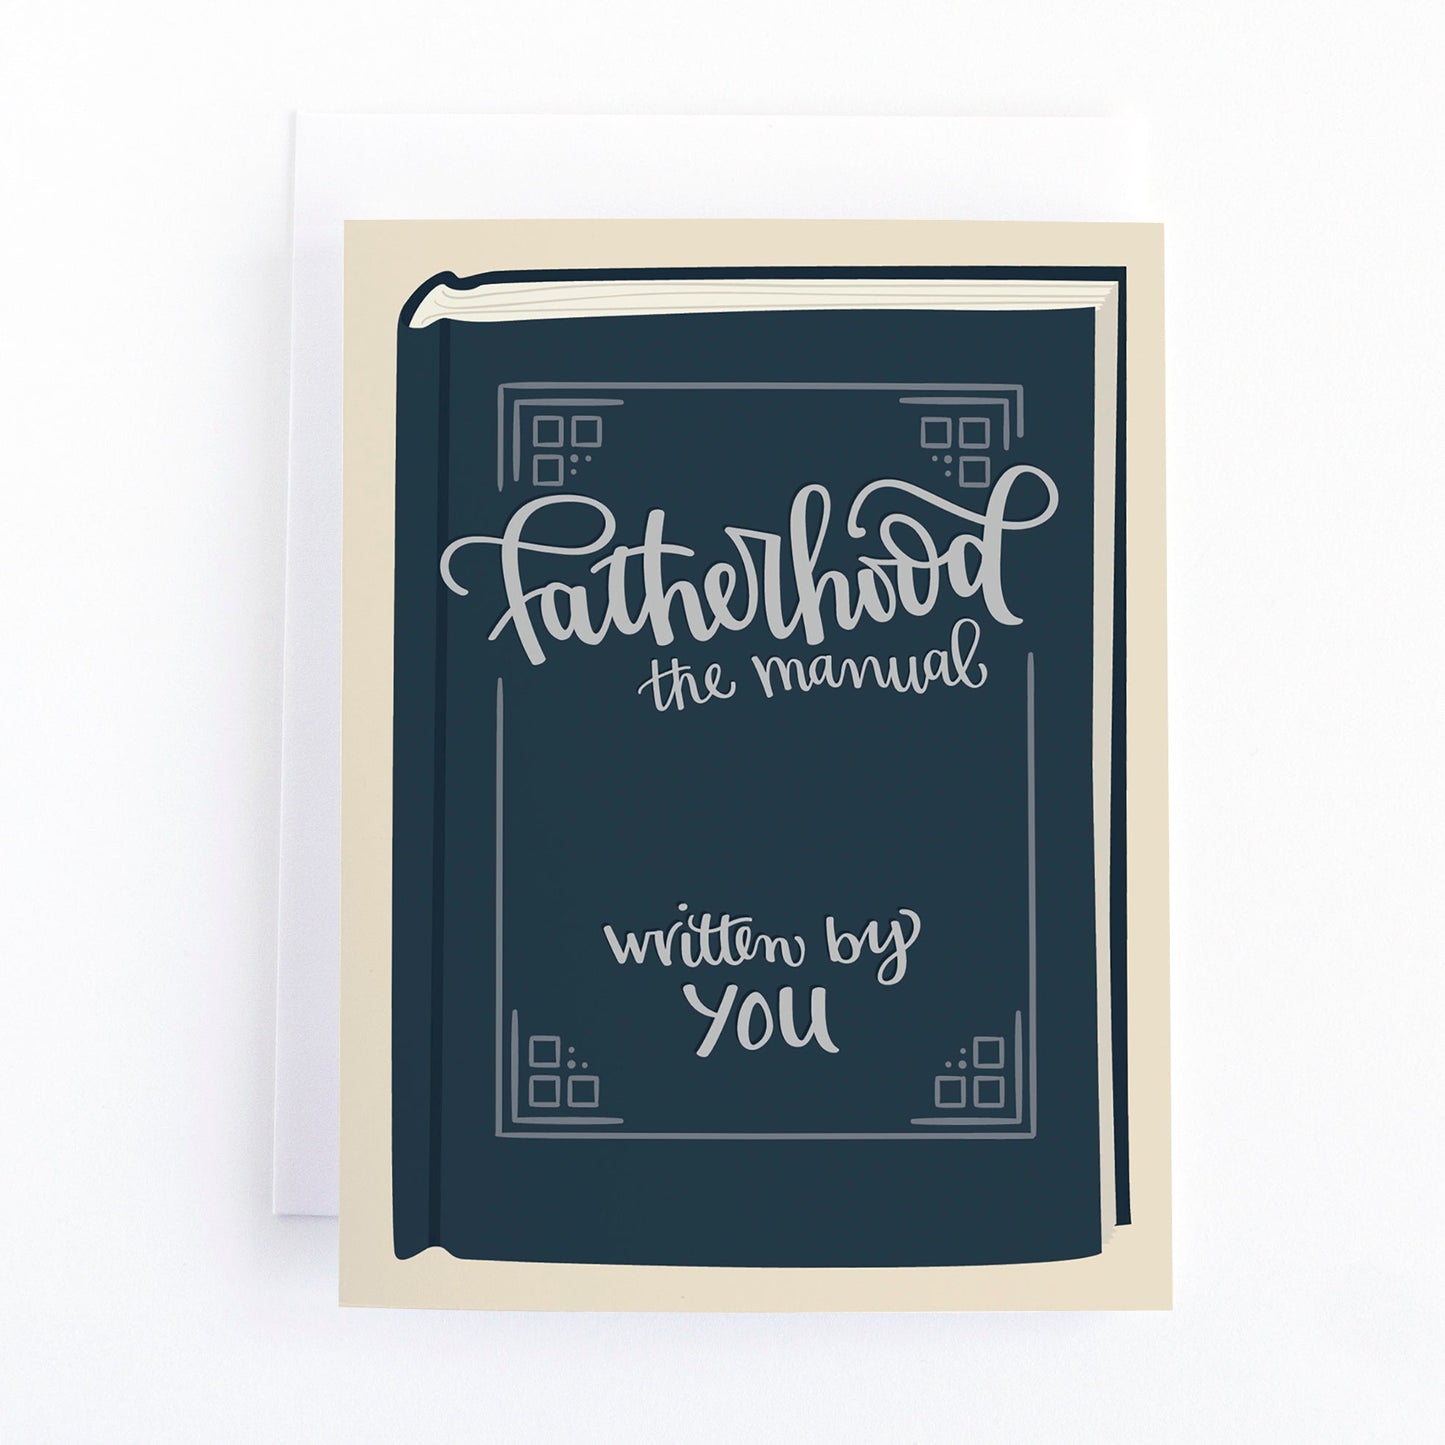 Book themed father's day card with an illlustration of a book with the title, Fatherhood: the manual, written by you.